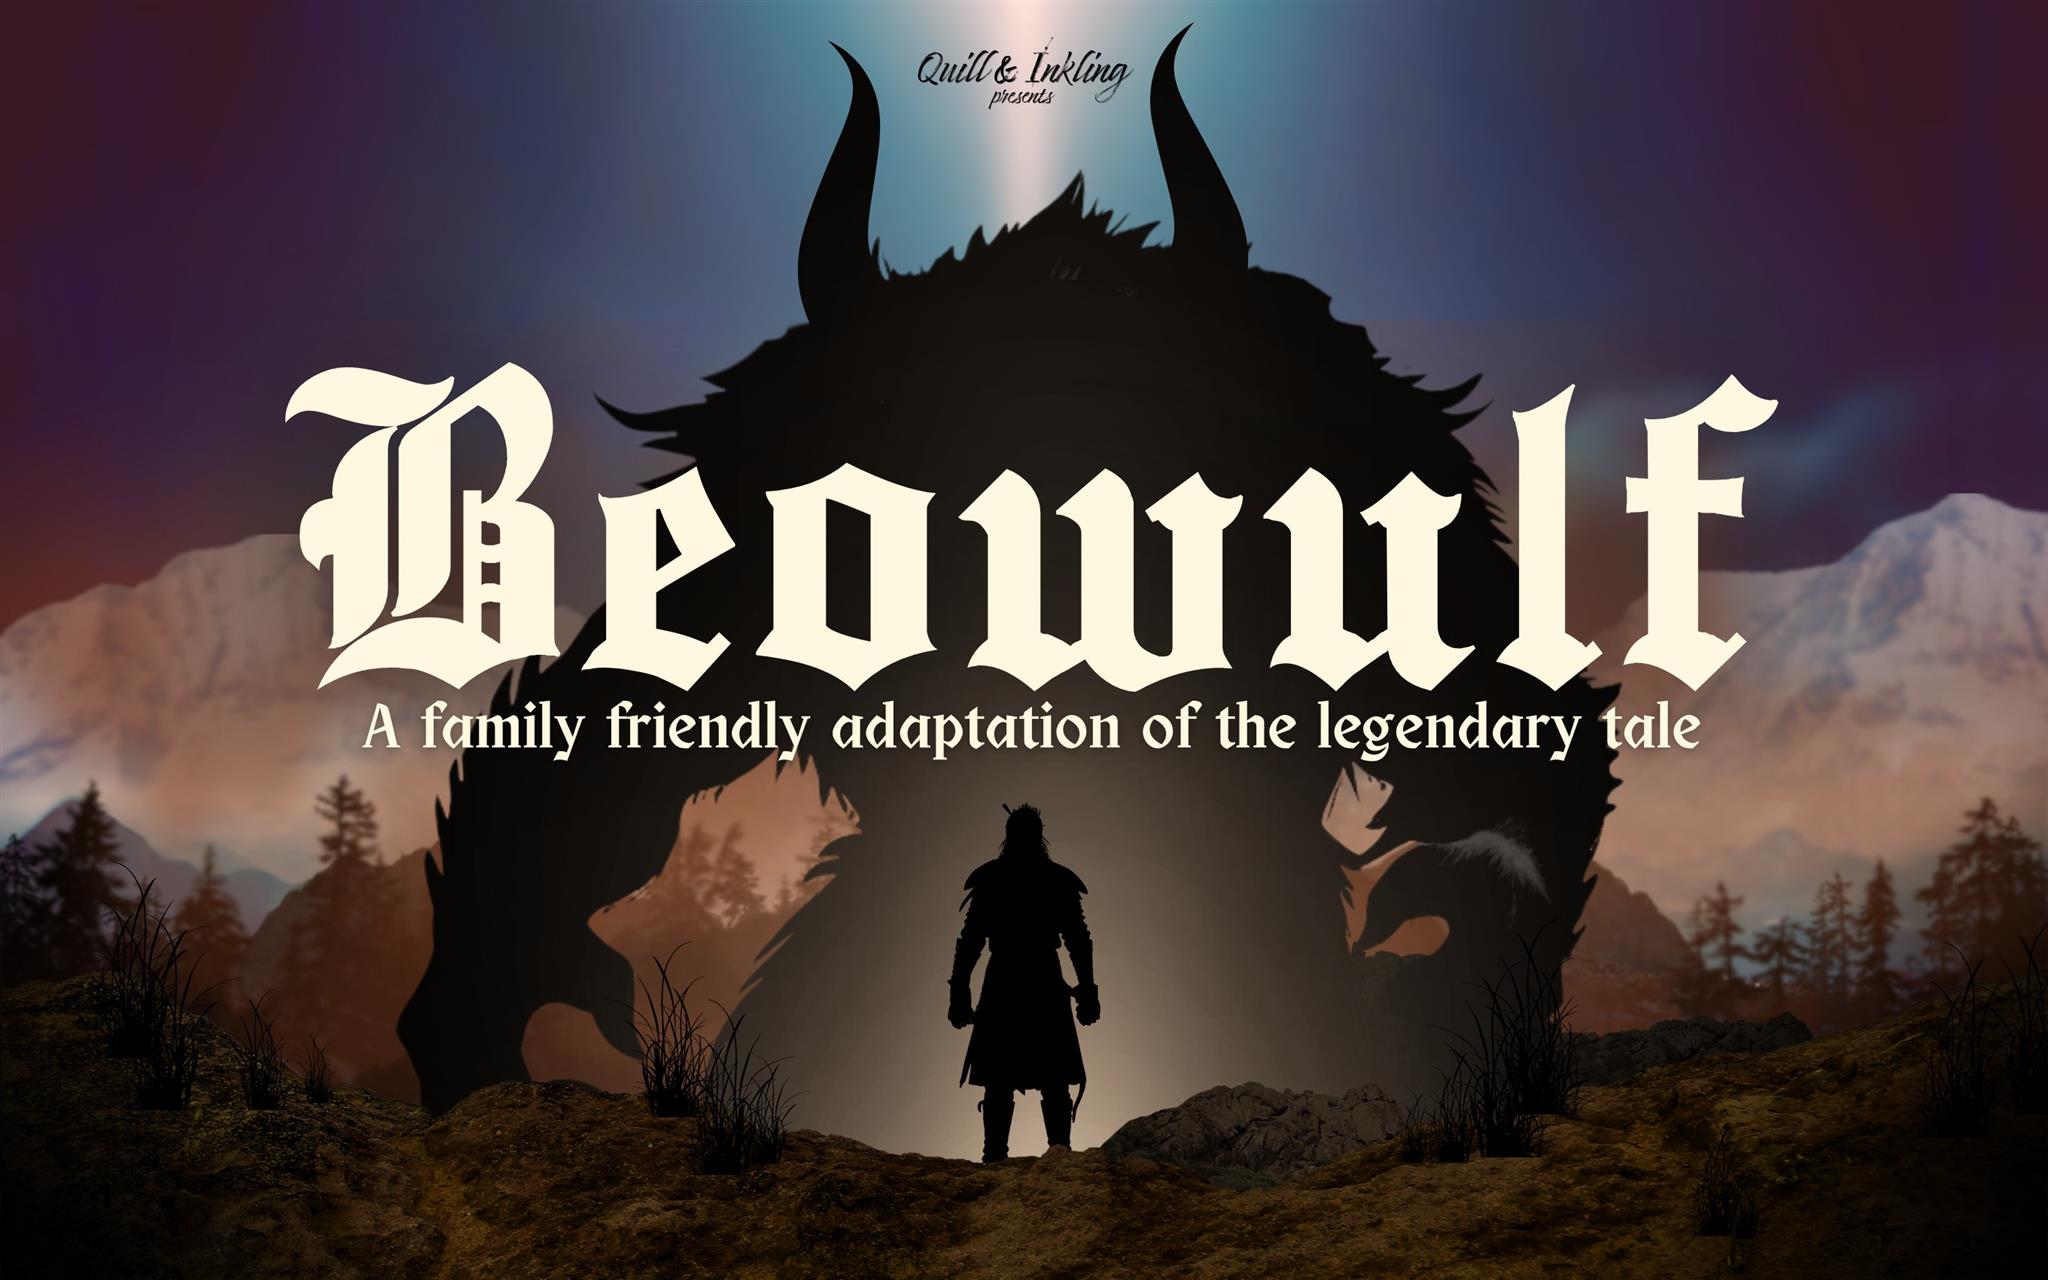 Theatre in the Parks - Beowulf